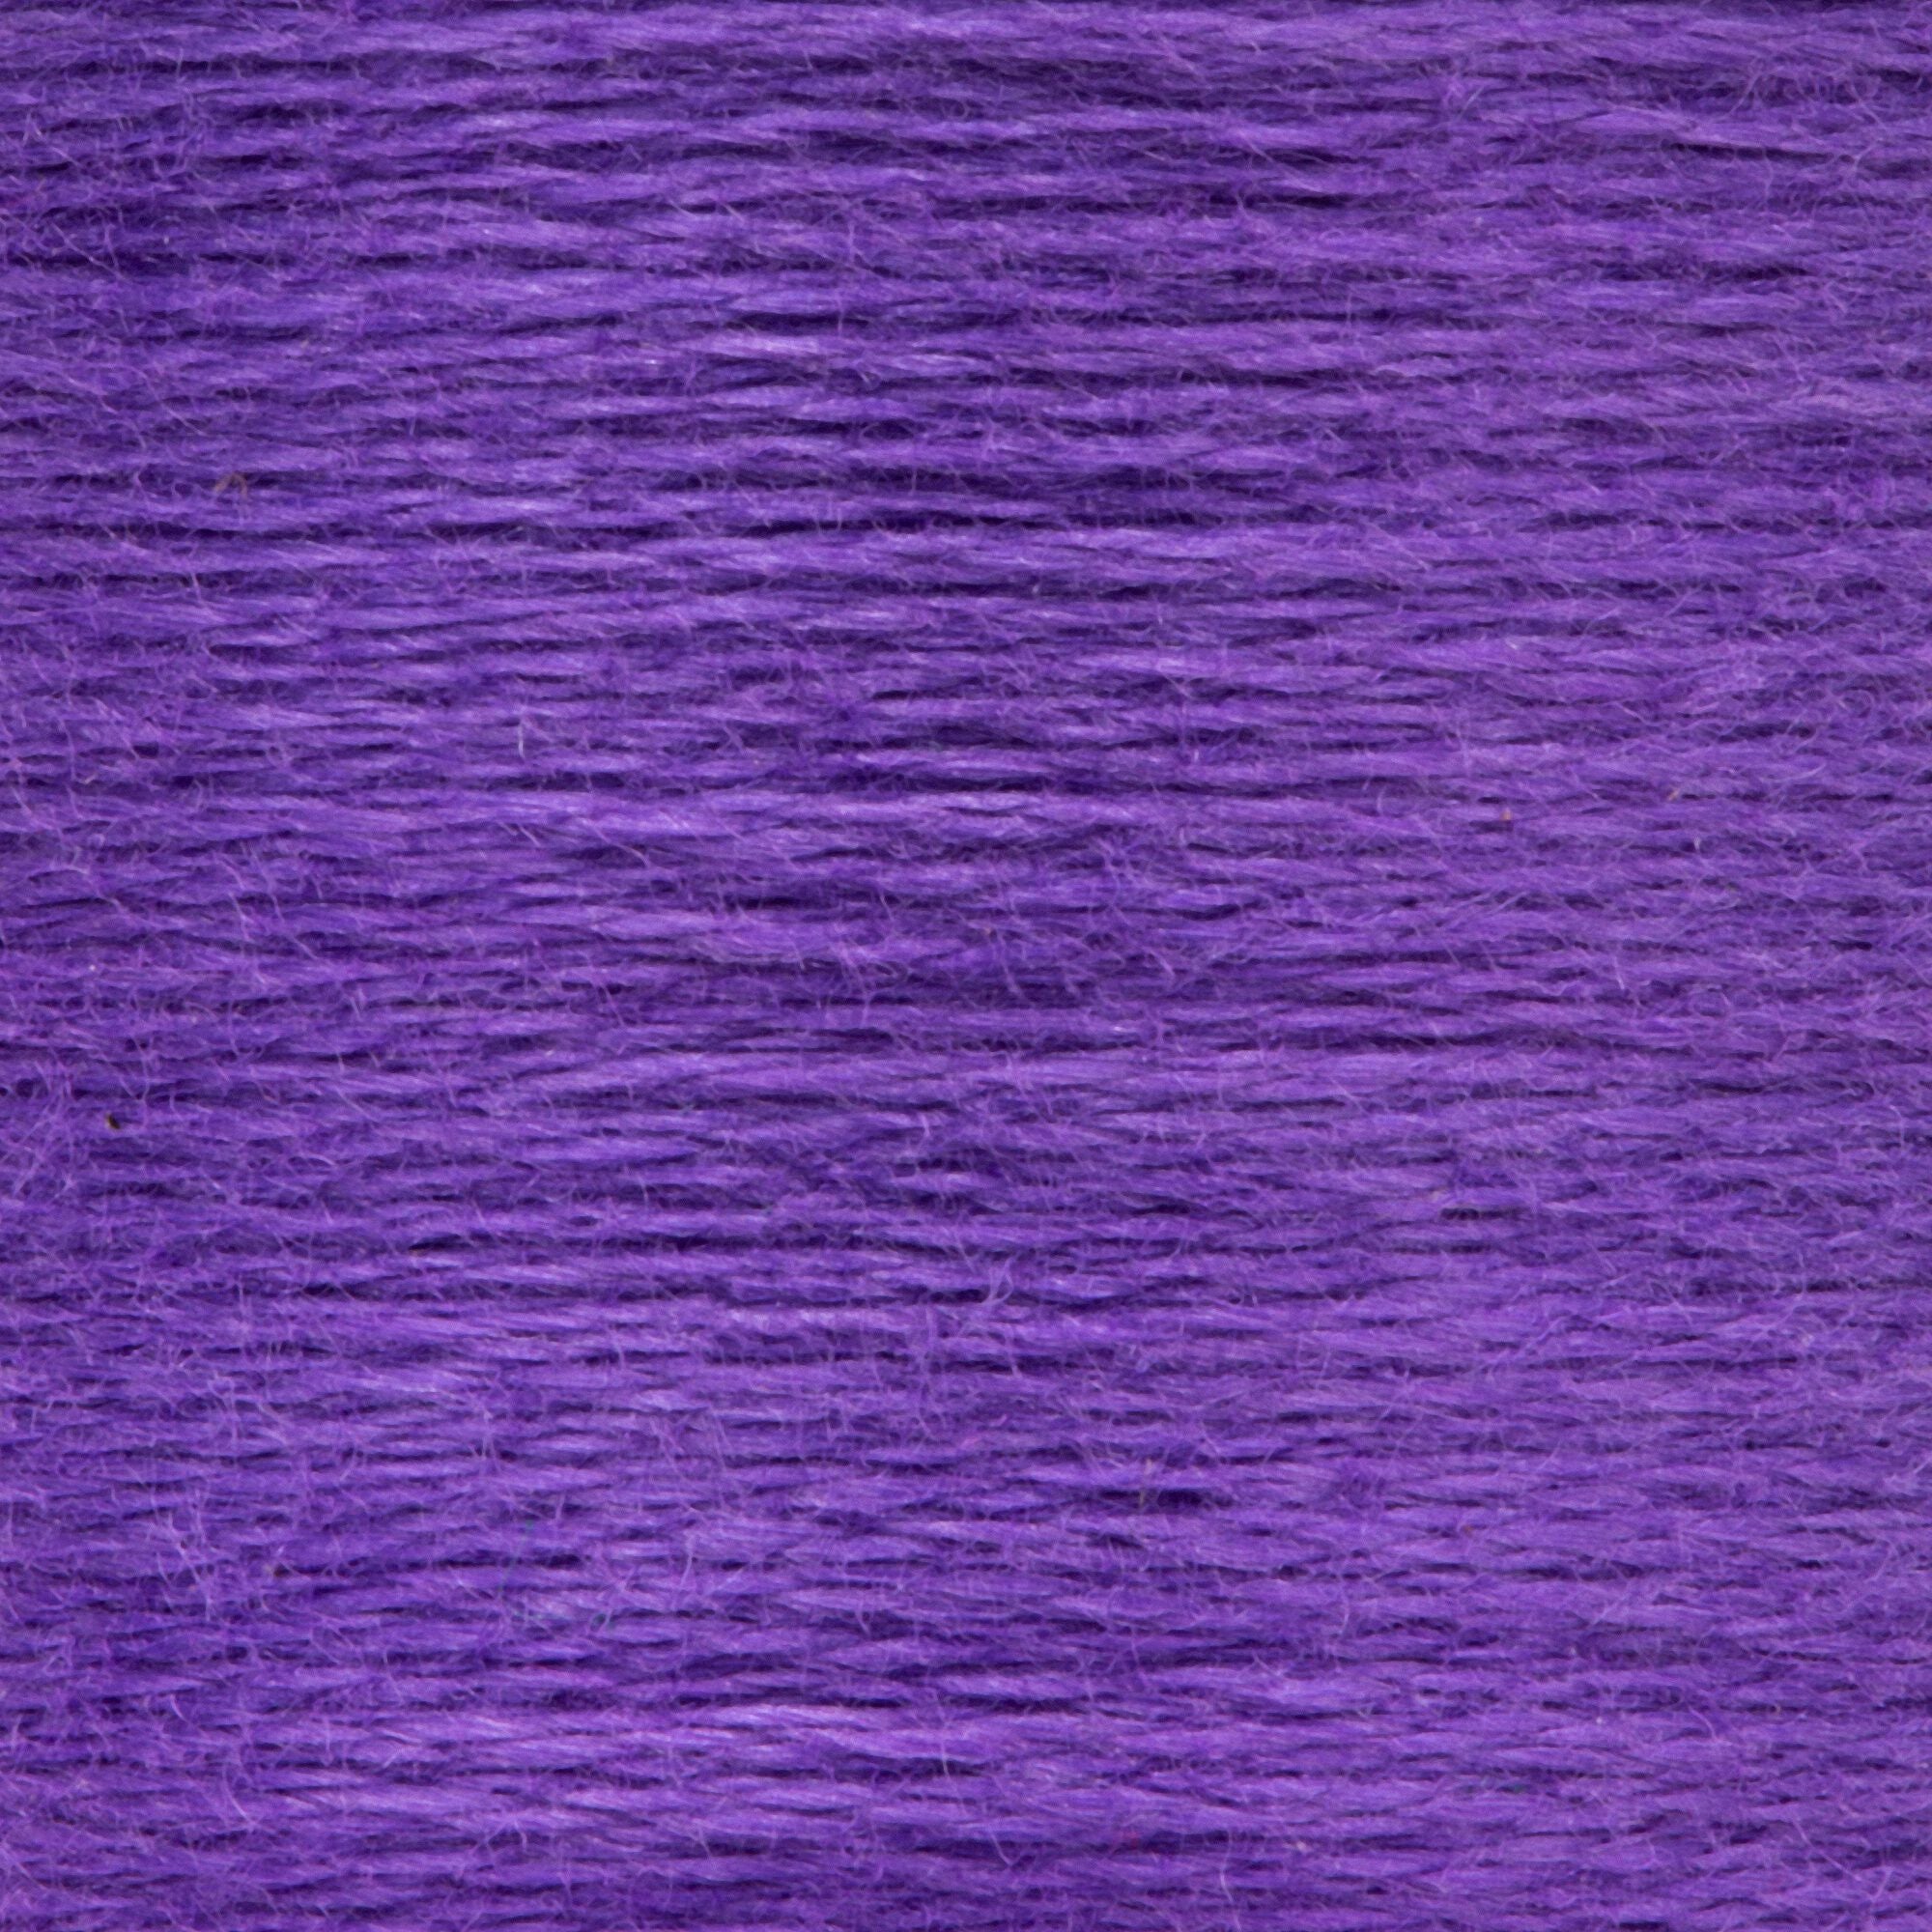 Anchor Embroidery Floss in Lavender Med Dk